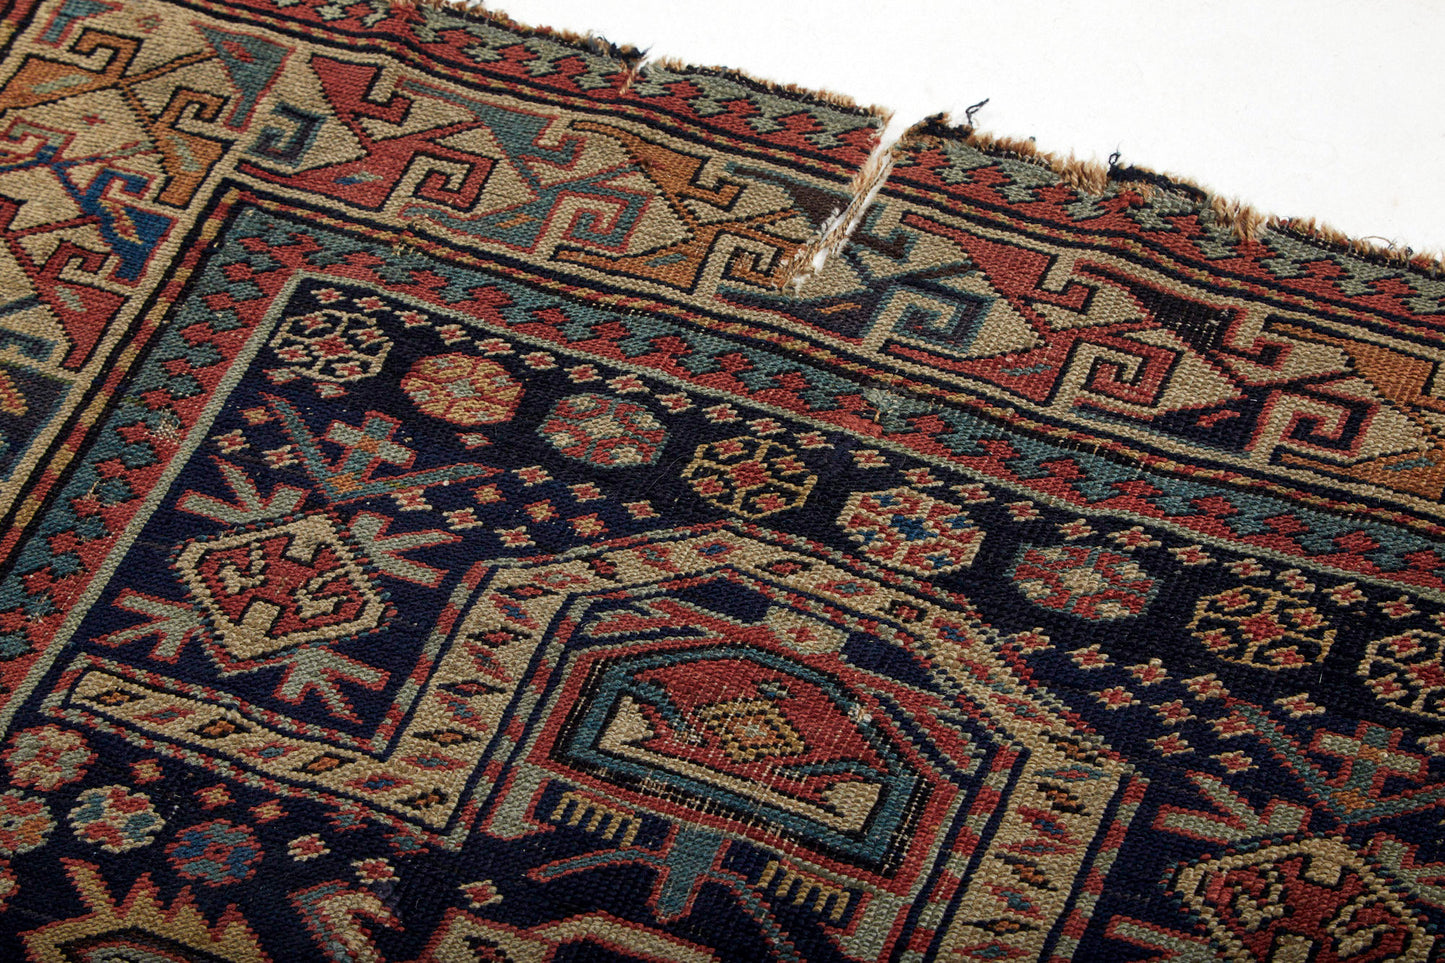 Antique Shirvan Prayer Persian rug intricately hand woven with beige base, dark blue center and yellow, pink and pale blue designs throughout with some repairs - Available from King Kennedy Rugs Los Angeles